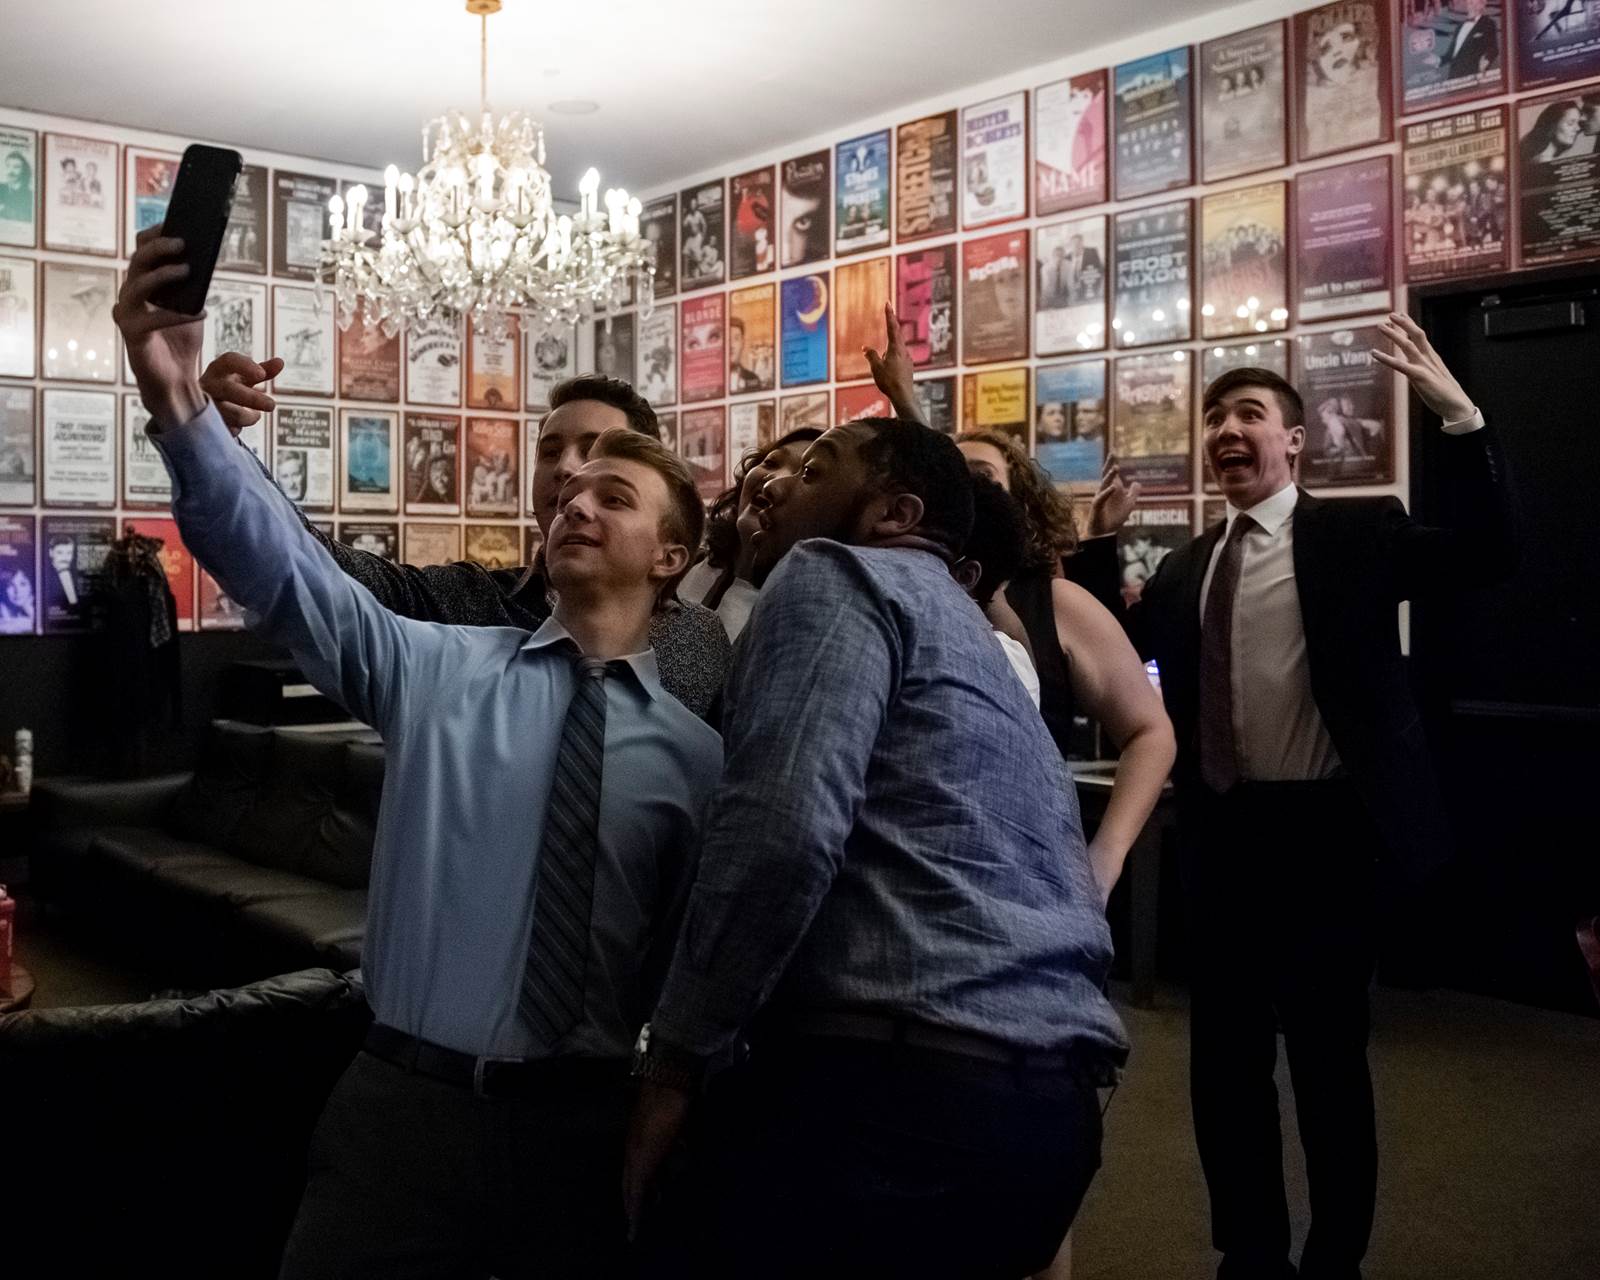 A group of students take a selfie in a room completely lined with show posters.